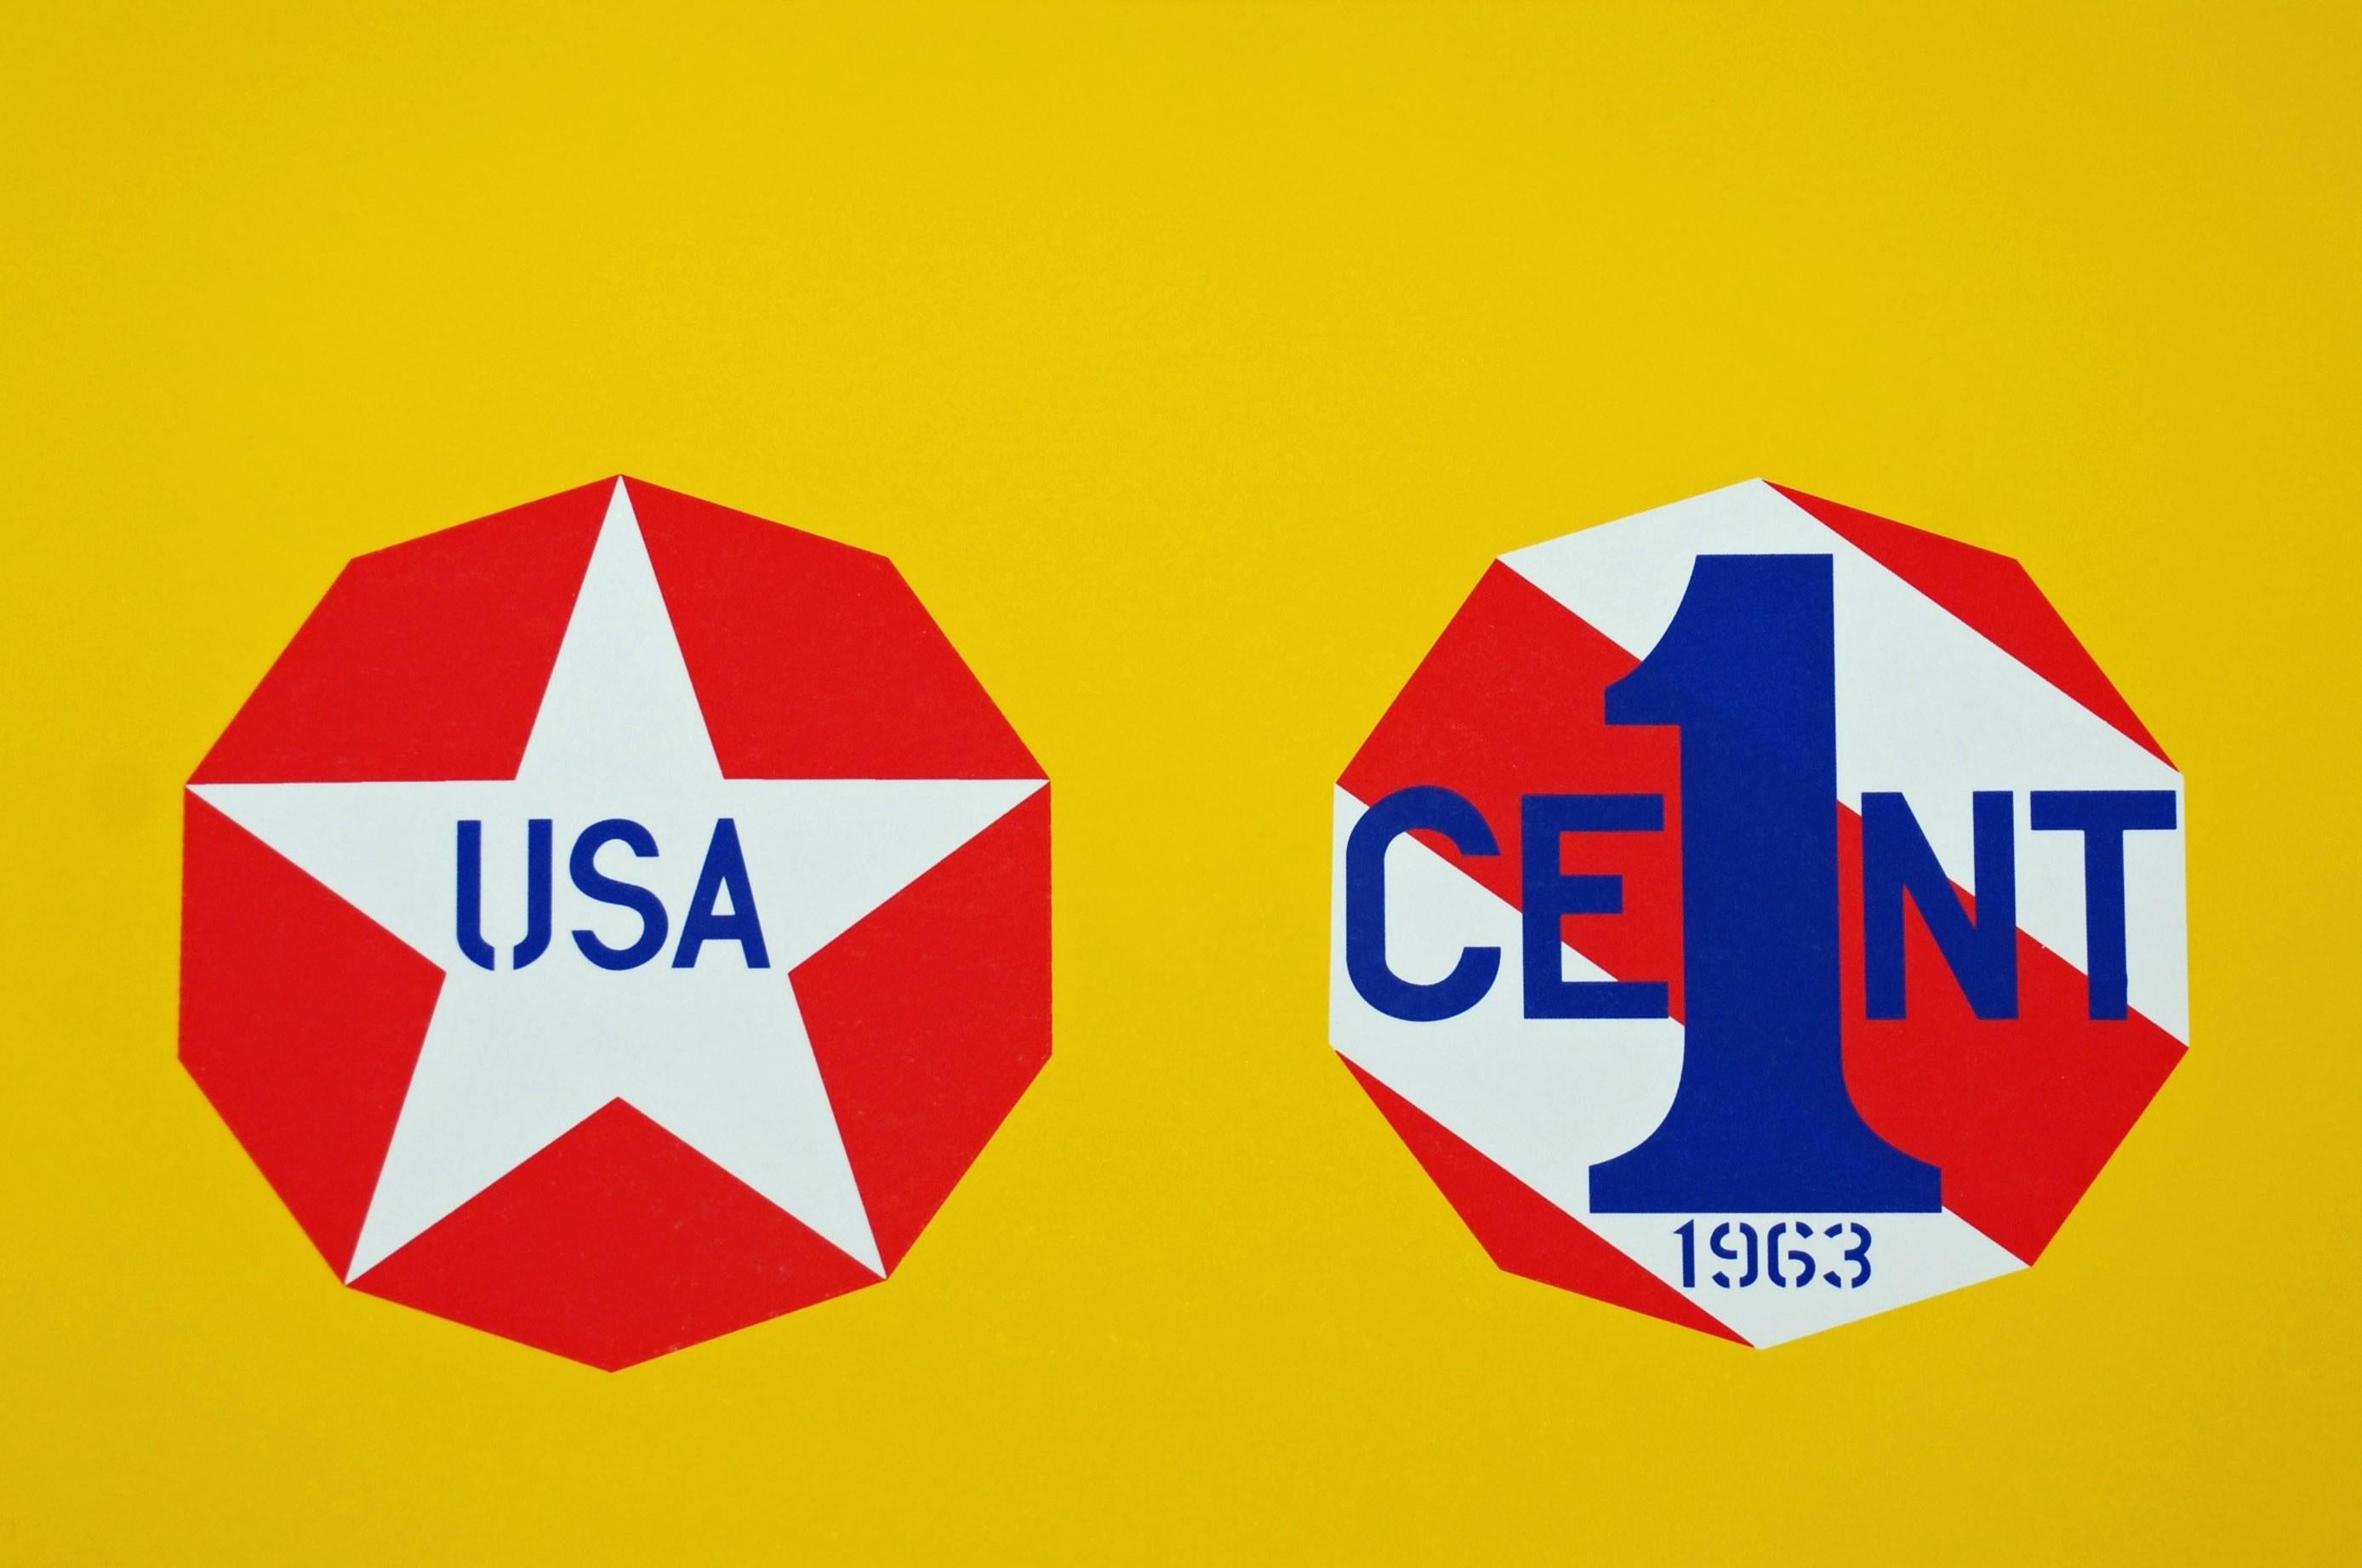 Robert Indiana Abstract Print - The New Glory Penny, from The American Dream